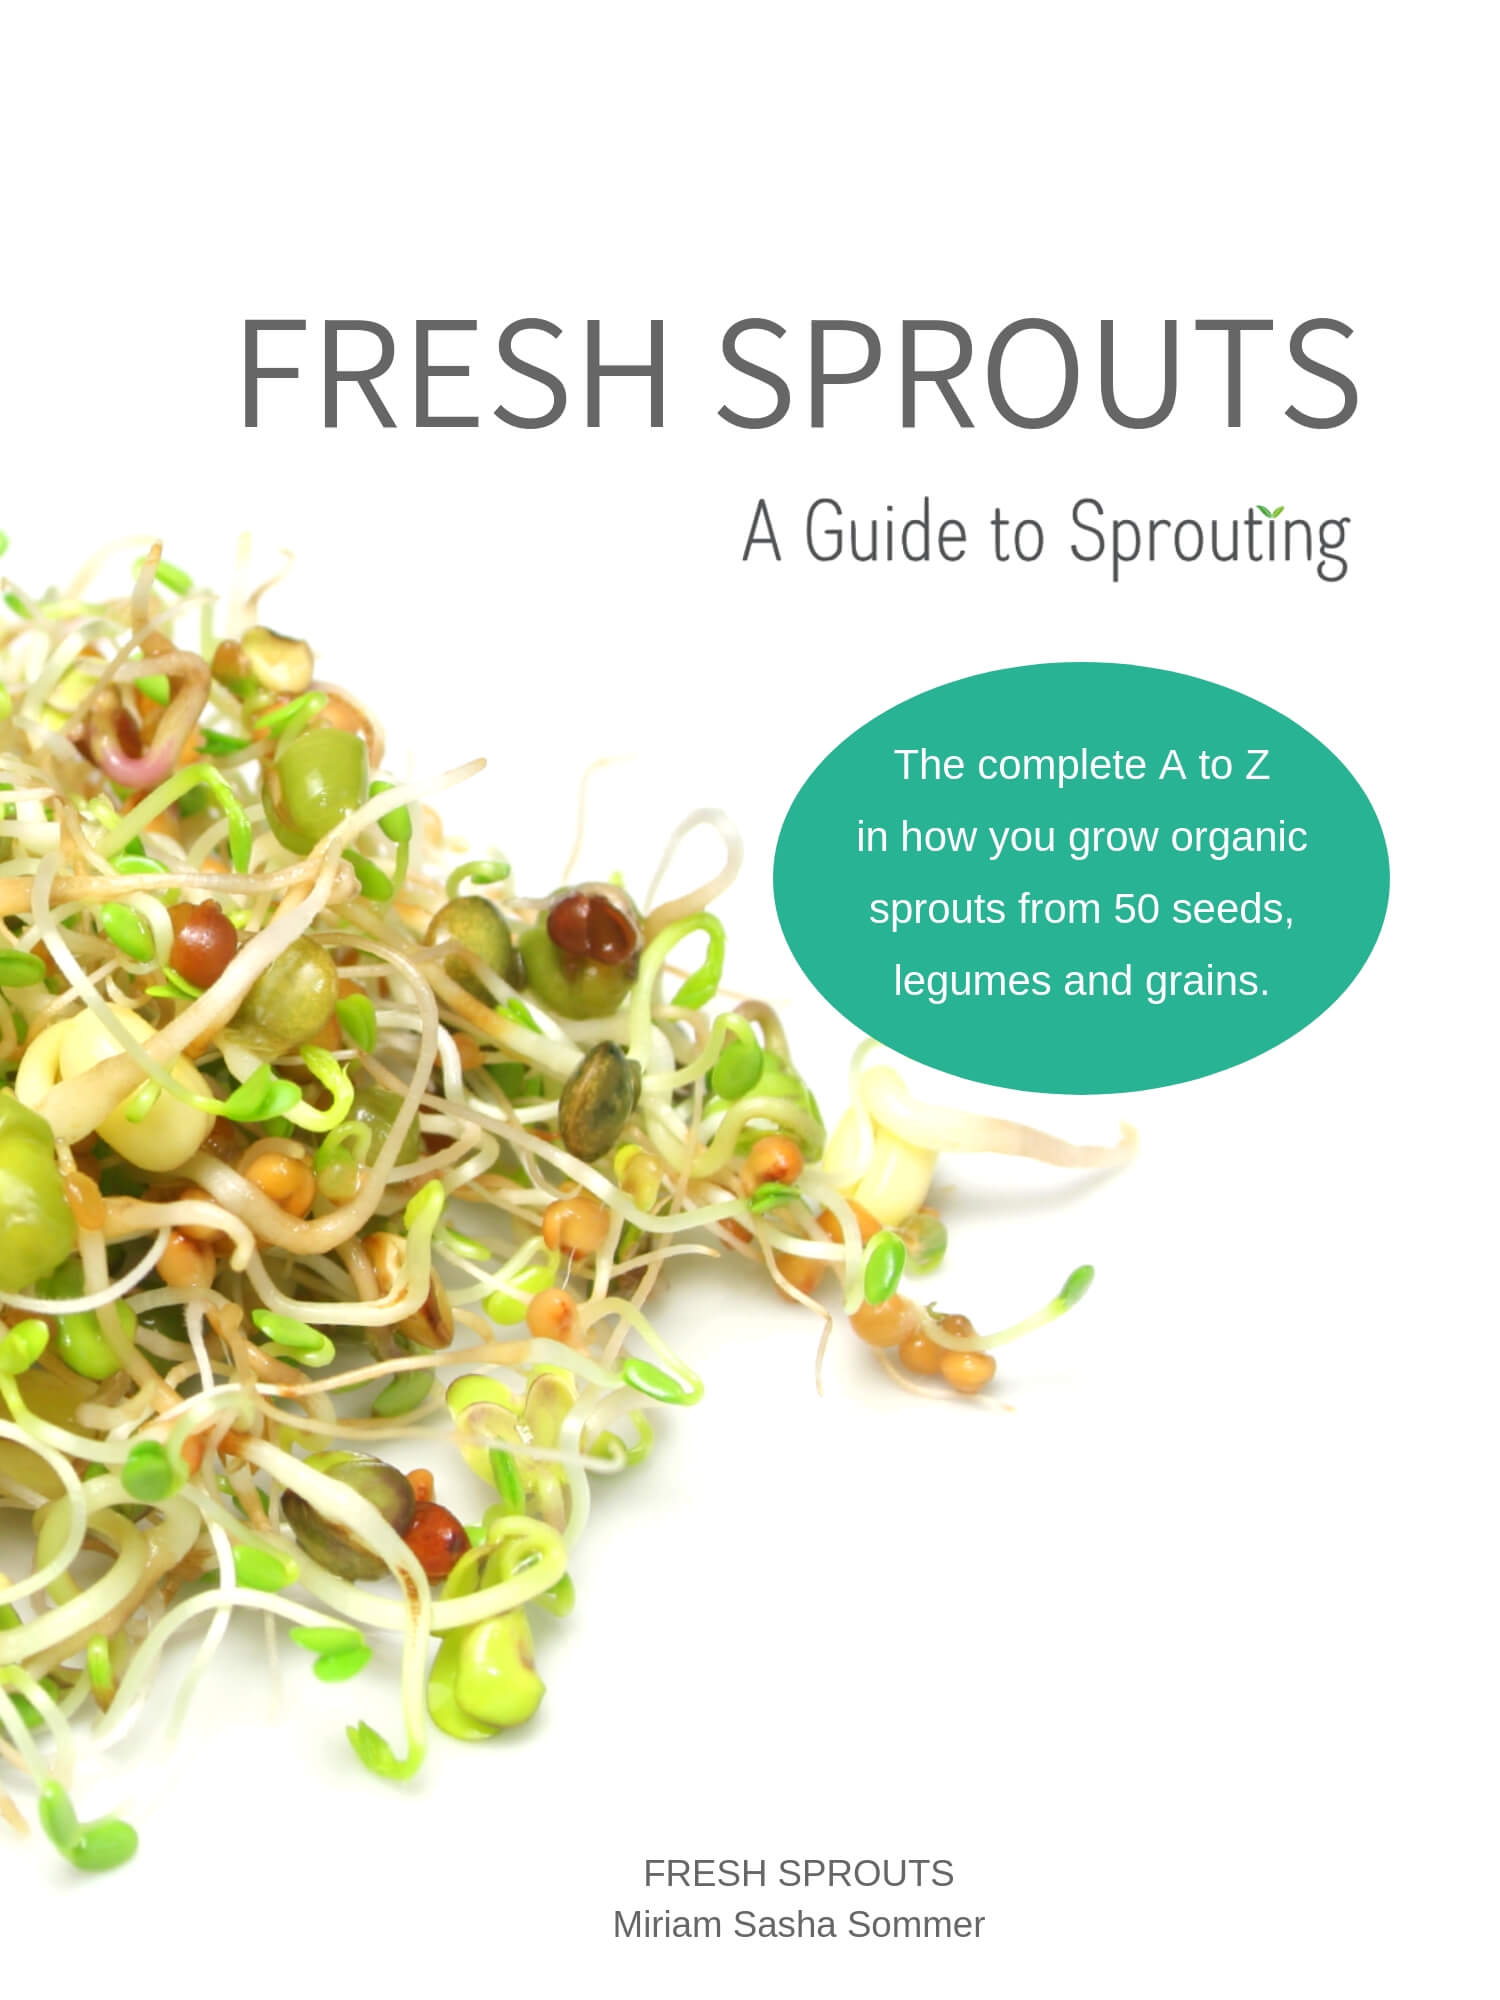 FRESH SPROUTS A Guide to Sprouting by Miriam Sasha Sommer